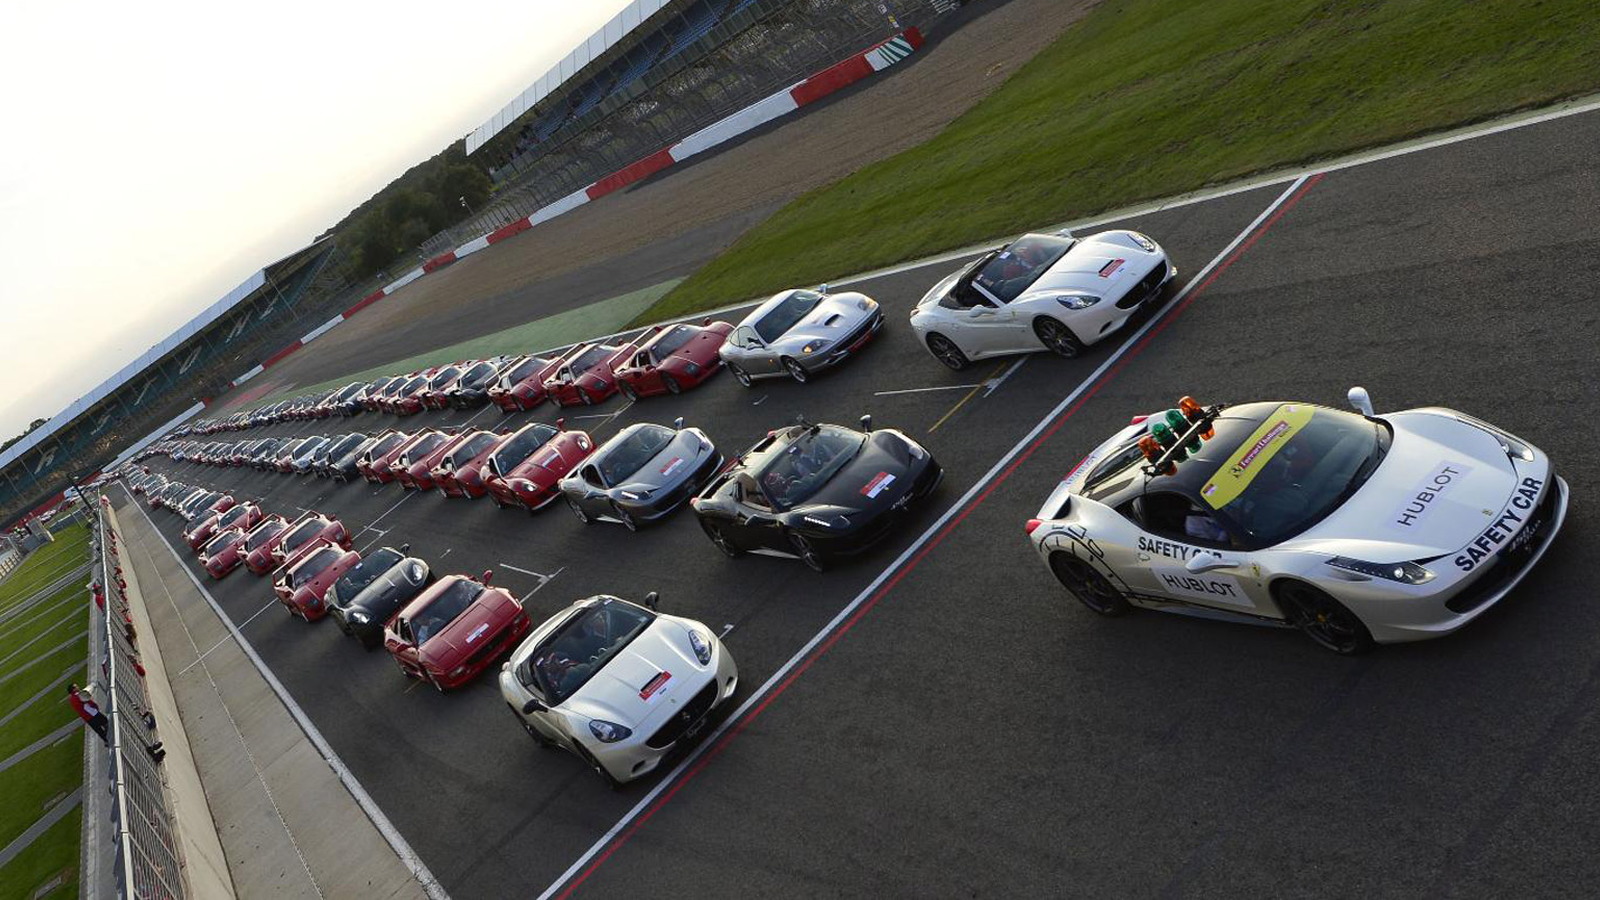 Gathering of 964 Ferraris at Silverstone in the UK have set a new world record